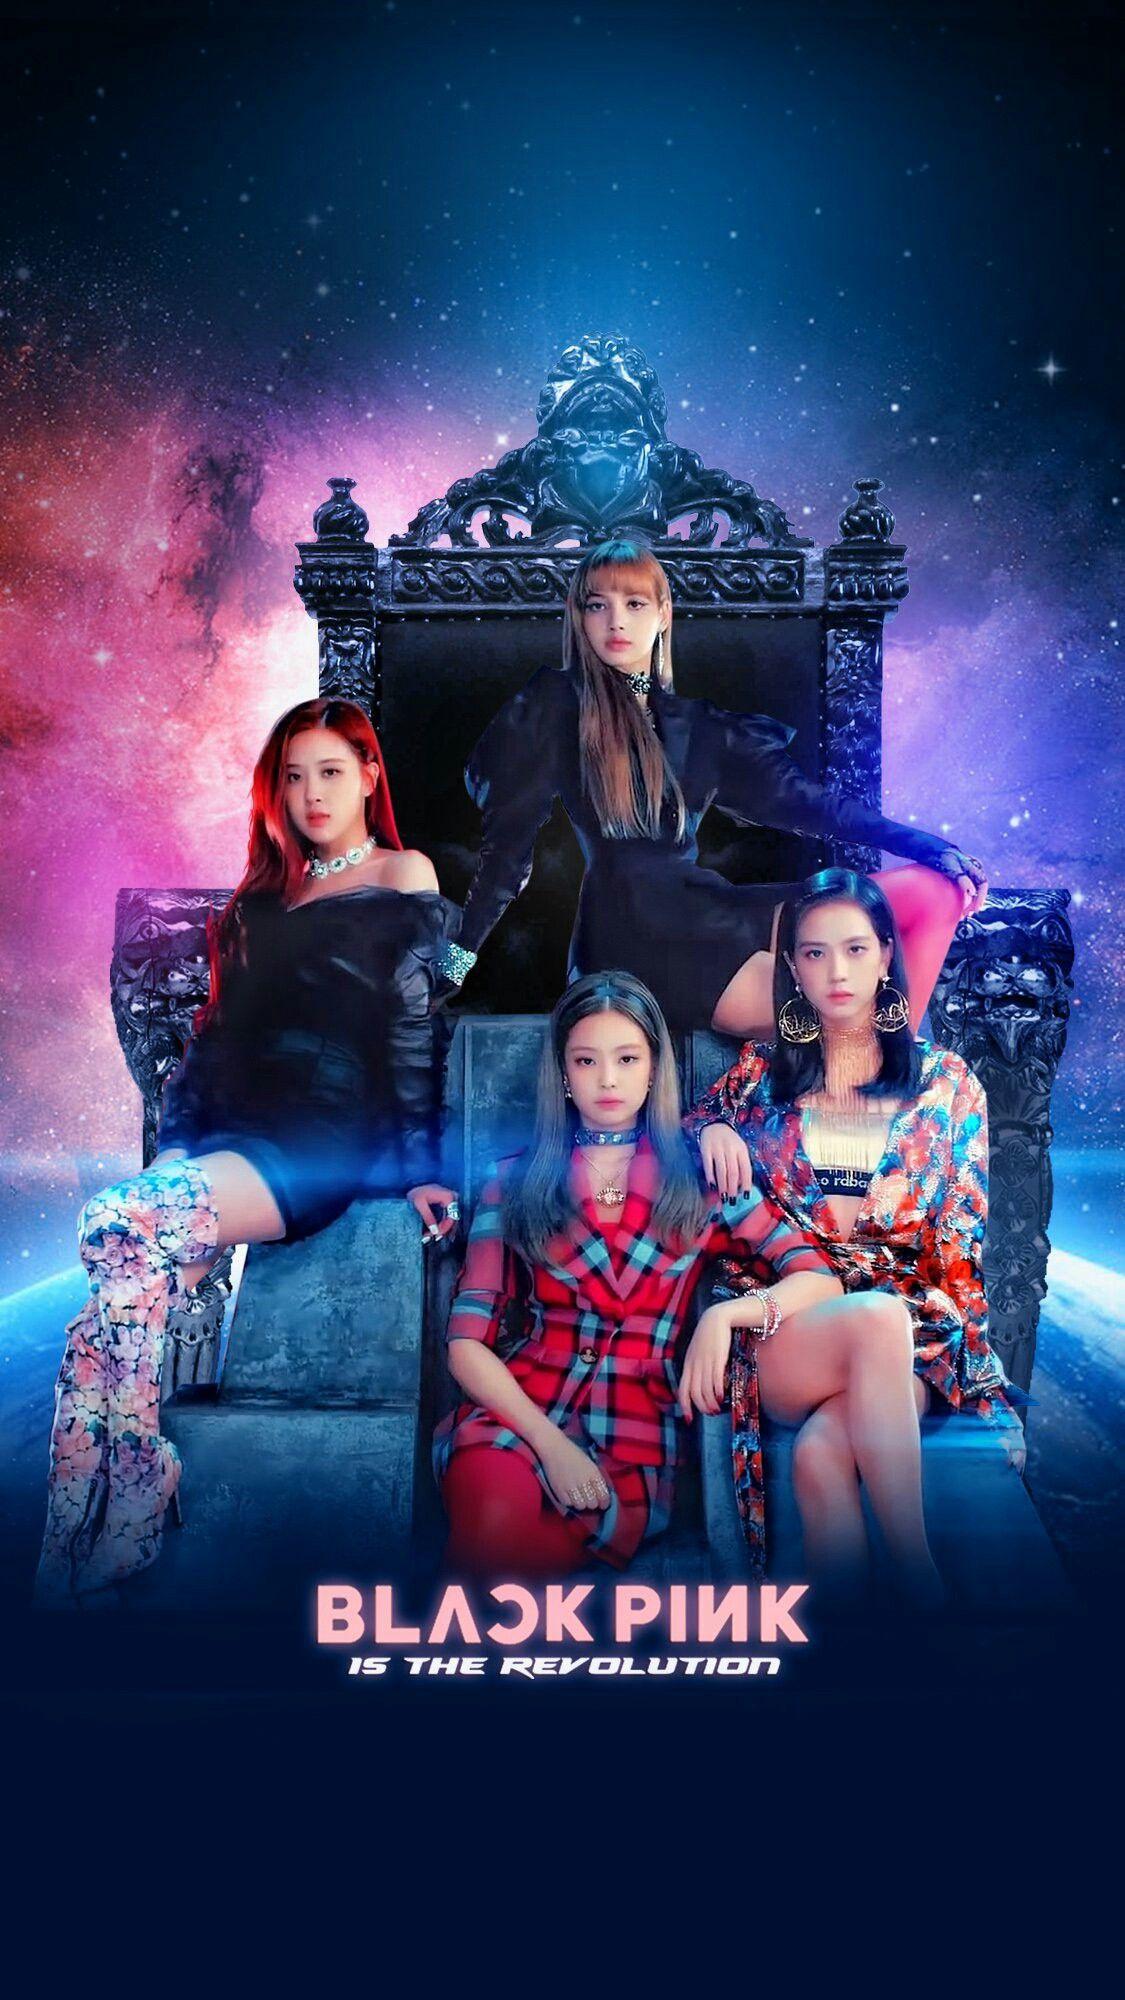 from BLACKPINK IN YOUR AREA to BLACKPINK IS THE REVOLUTION real